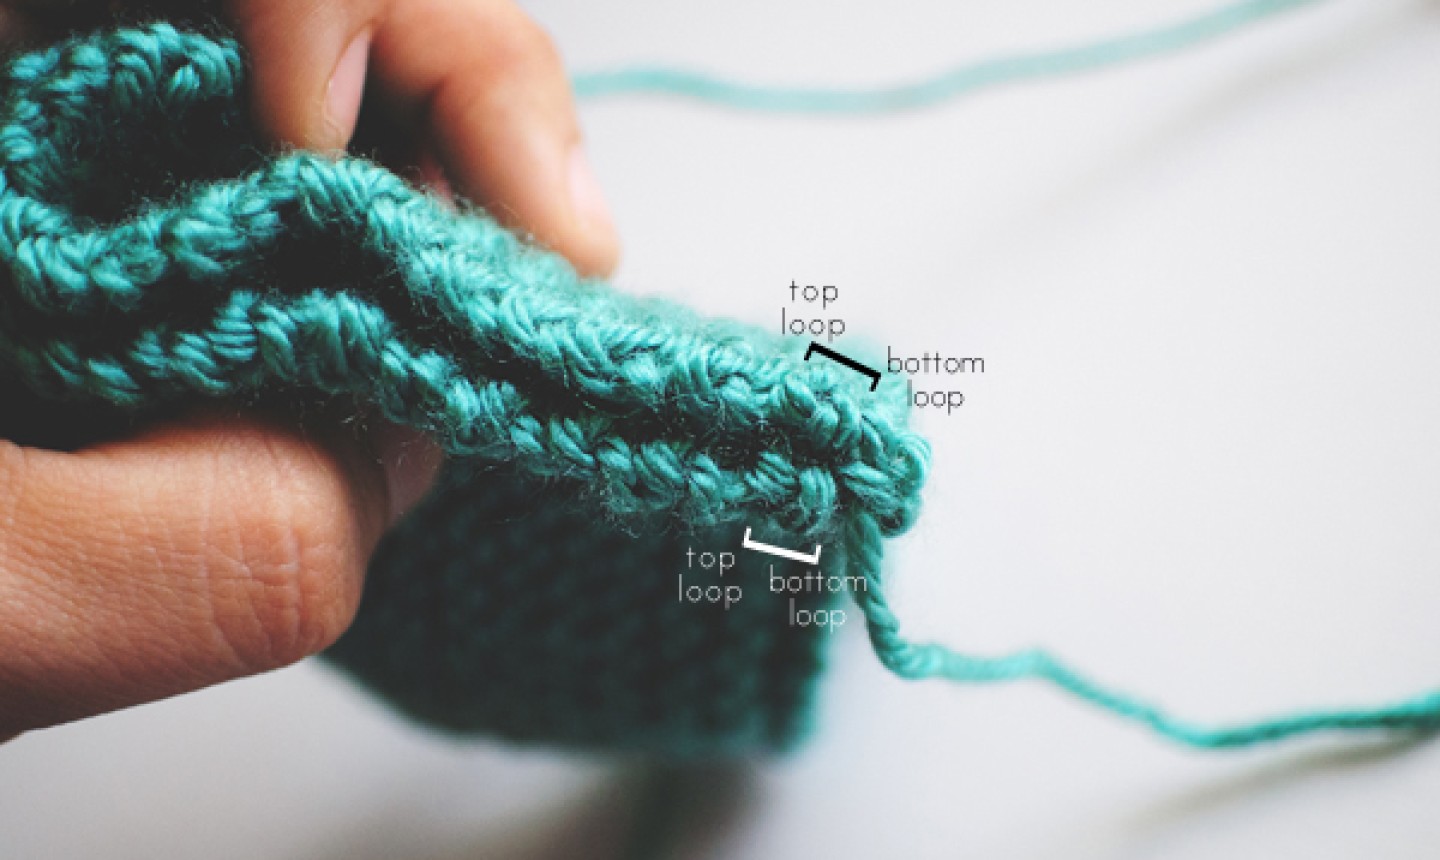 How to sew knitting pieces together and obtain a flat seam